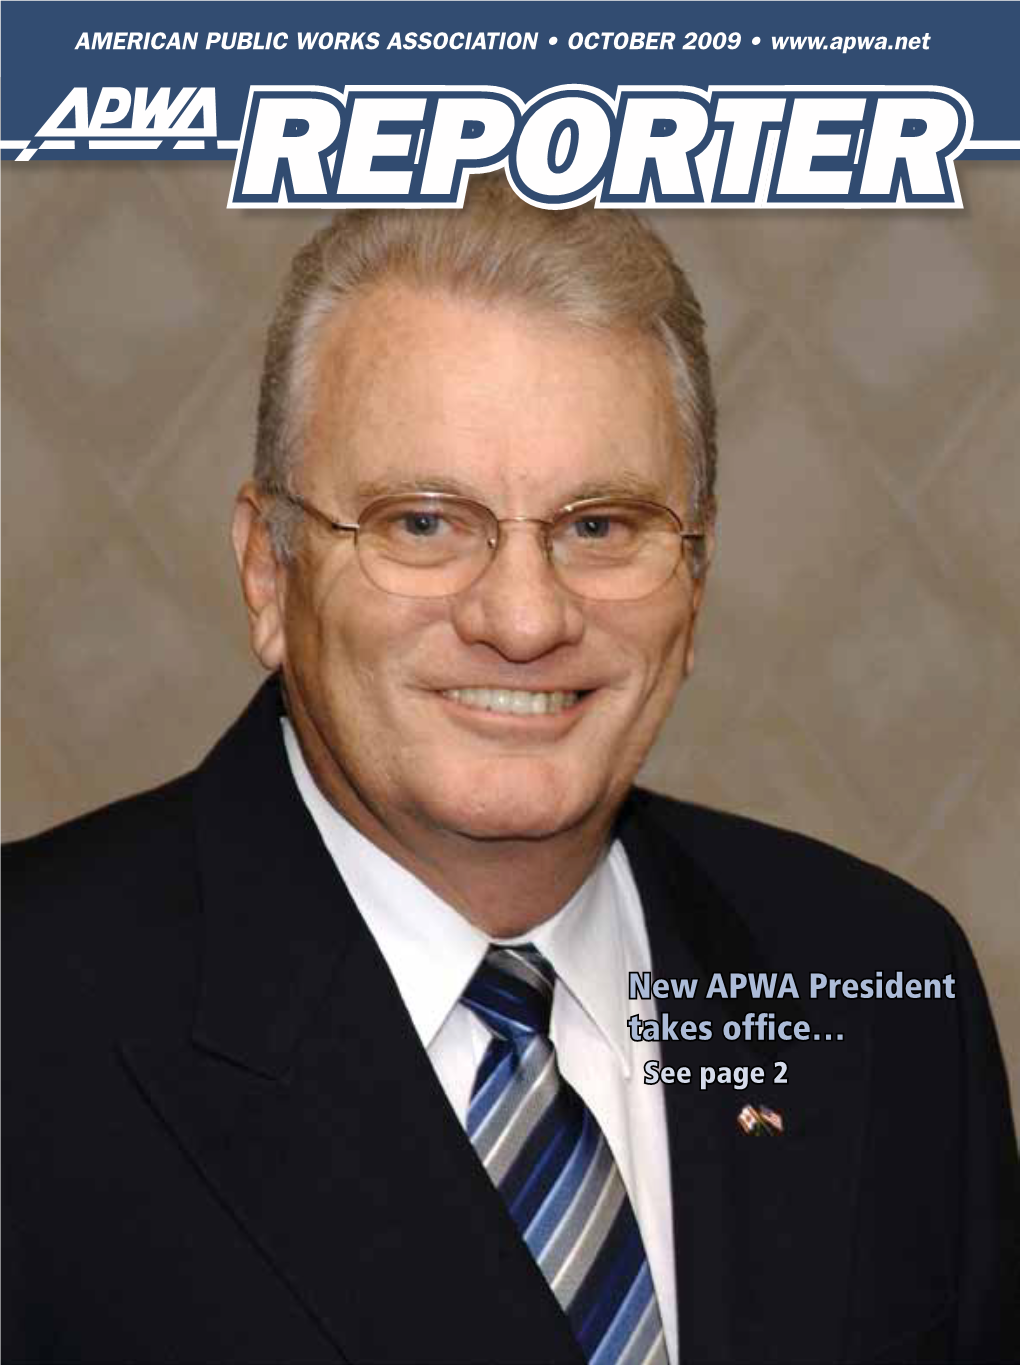 New APWA President Takes Office… See Page 2 Organization Greener Make Your Cut Fleet Costs 15–30% and Improve Service with GIS